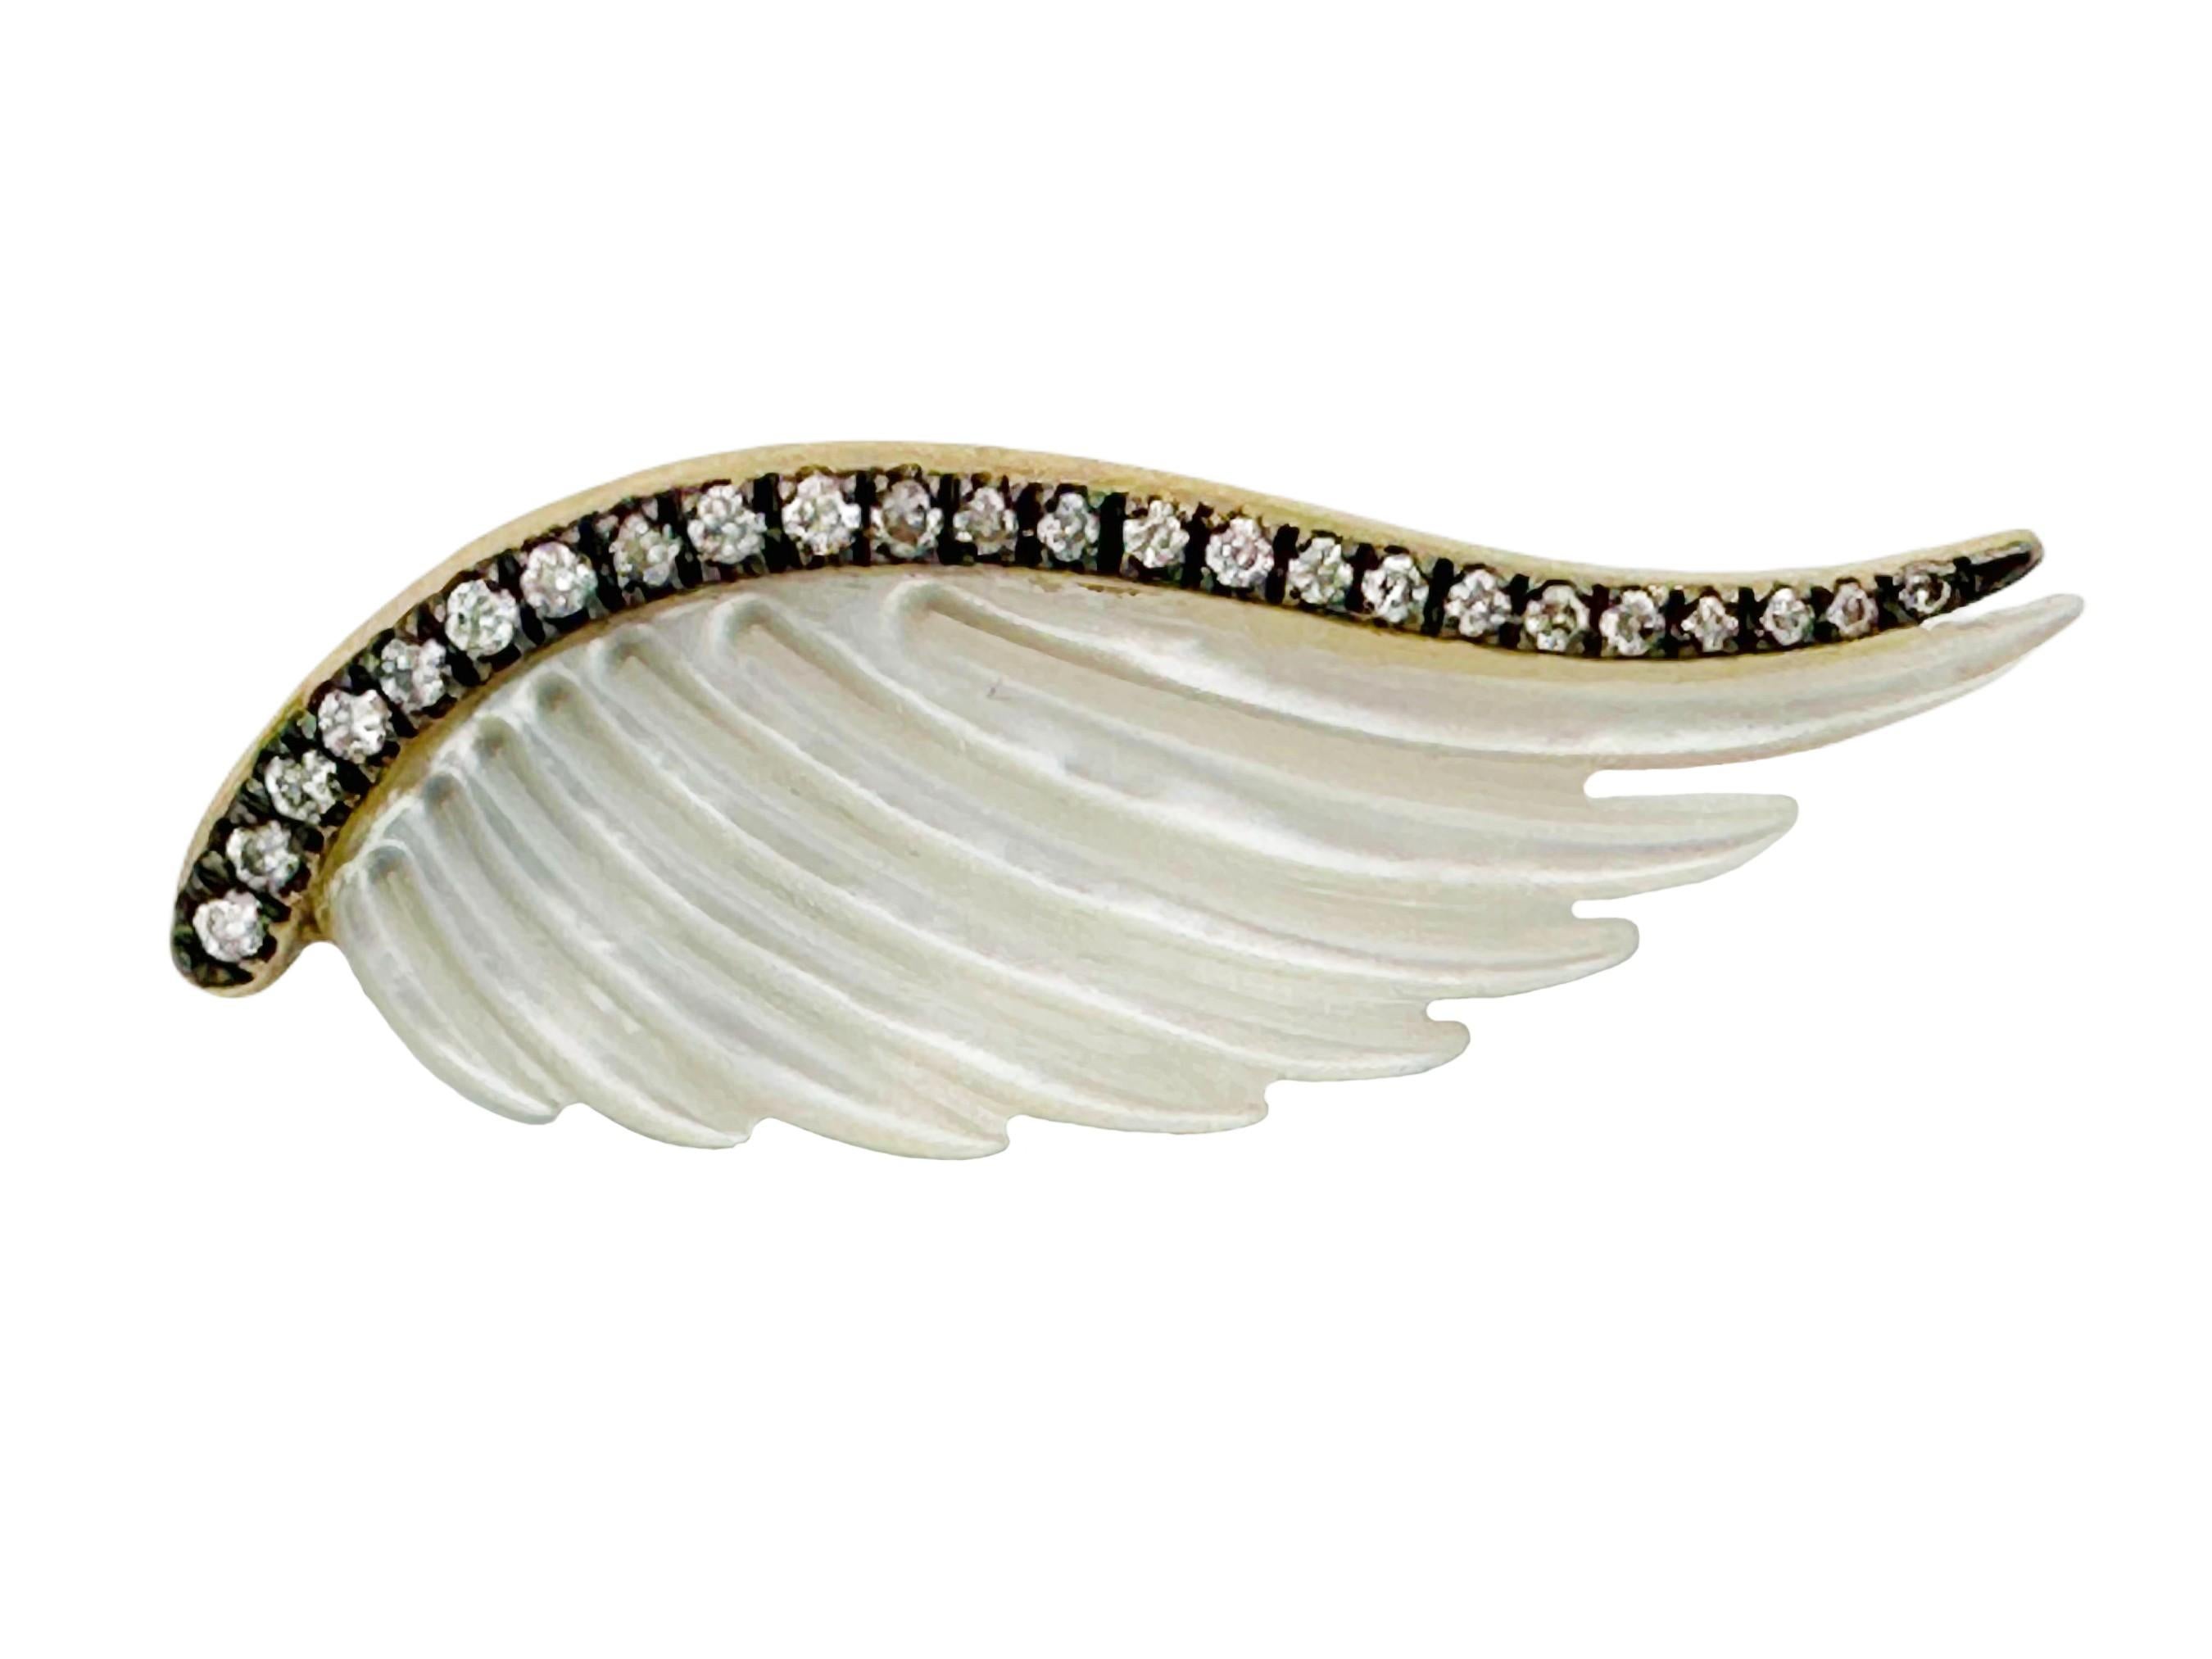 Gorgeous, dramatic and ethereal. These Noor Fares angel wing ear climbers are show-stoppers! Composed of 18k gold, lustrous carved mother-of-pearl, and 0.52cttw of diamonds in a blackened setting, these earrings are red carpet-worthy. They'd be